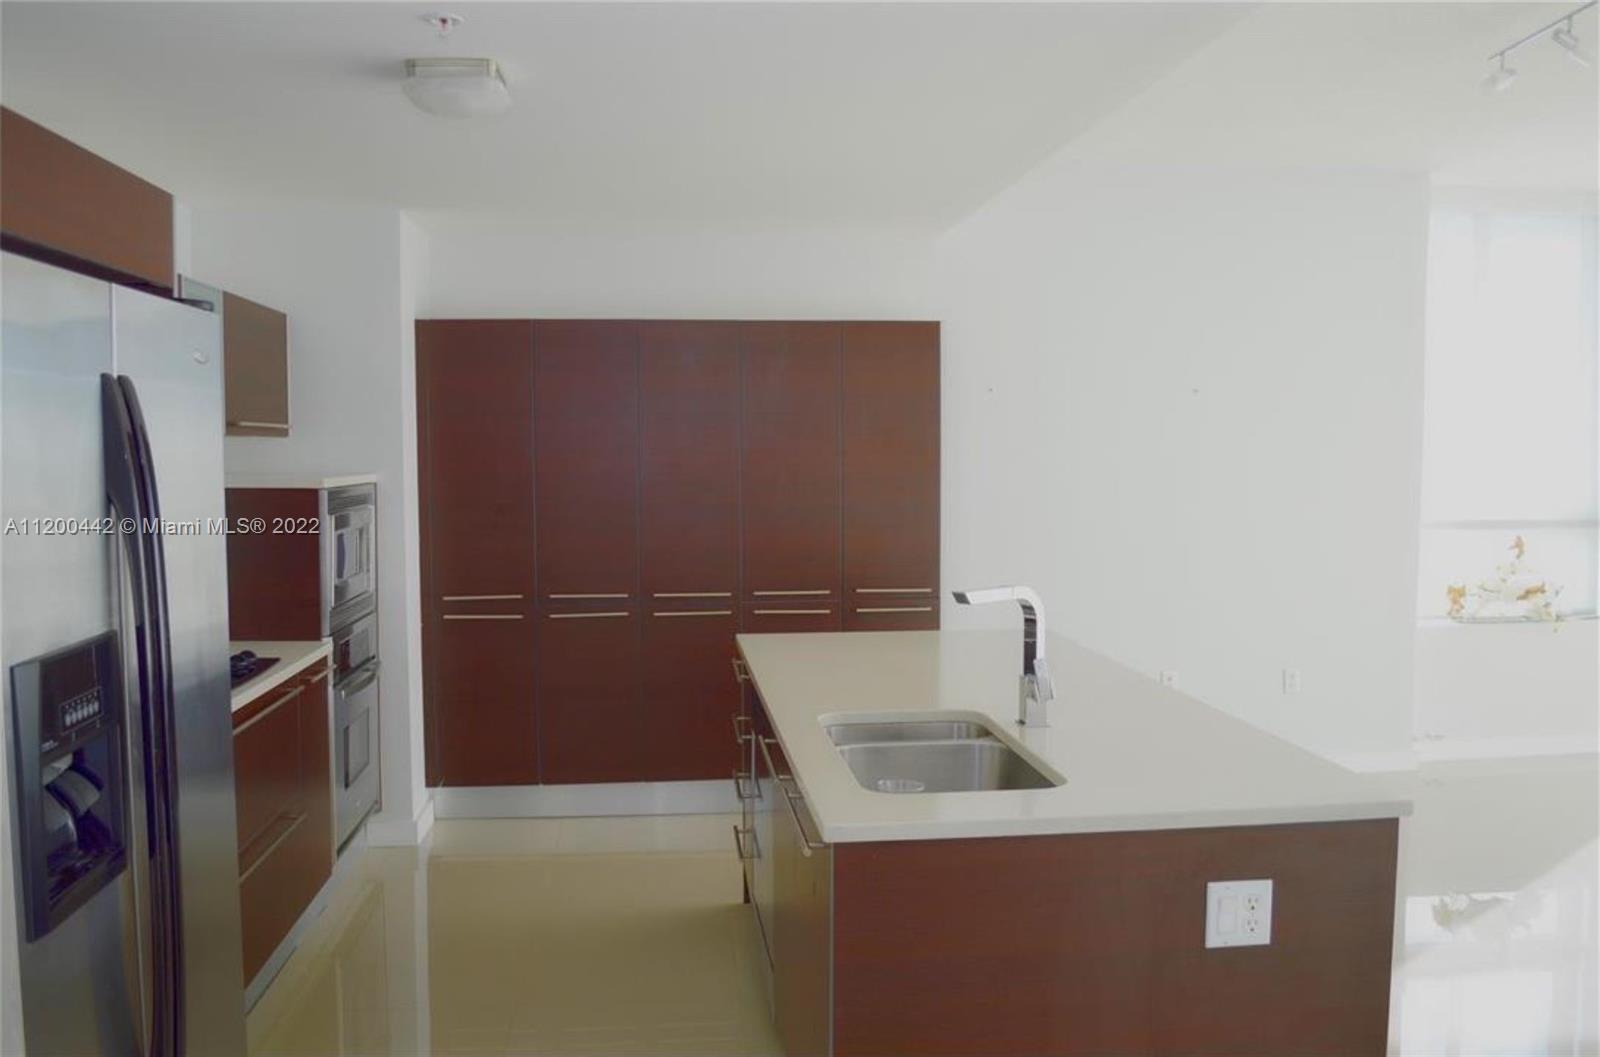 Photo 2 of Quantum on The Bay Apt 4018 in Miami - MLS A11200442